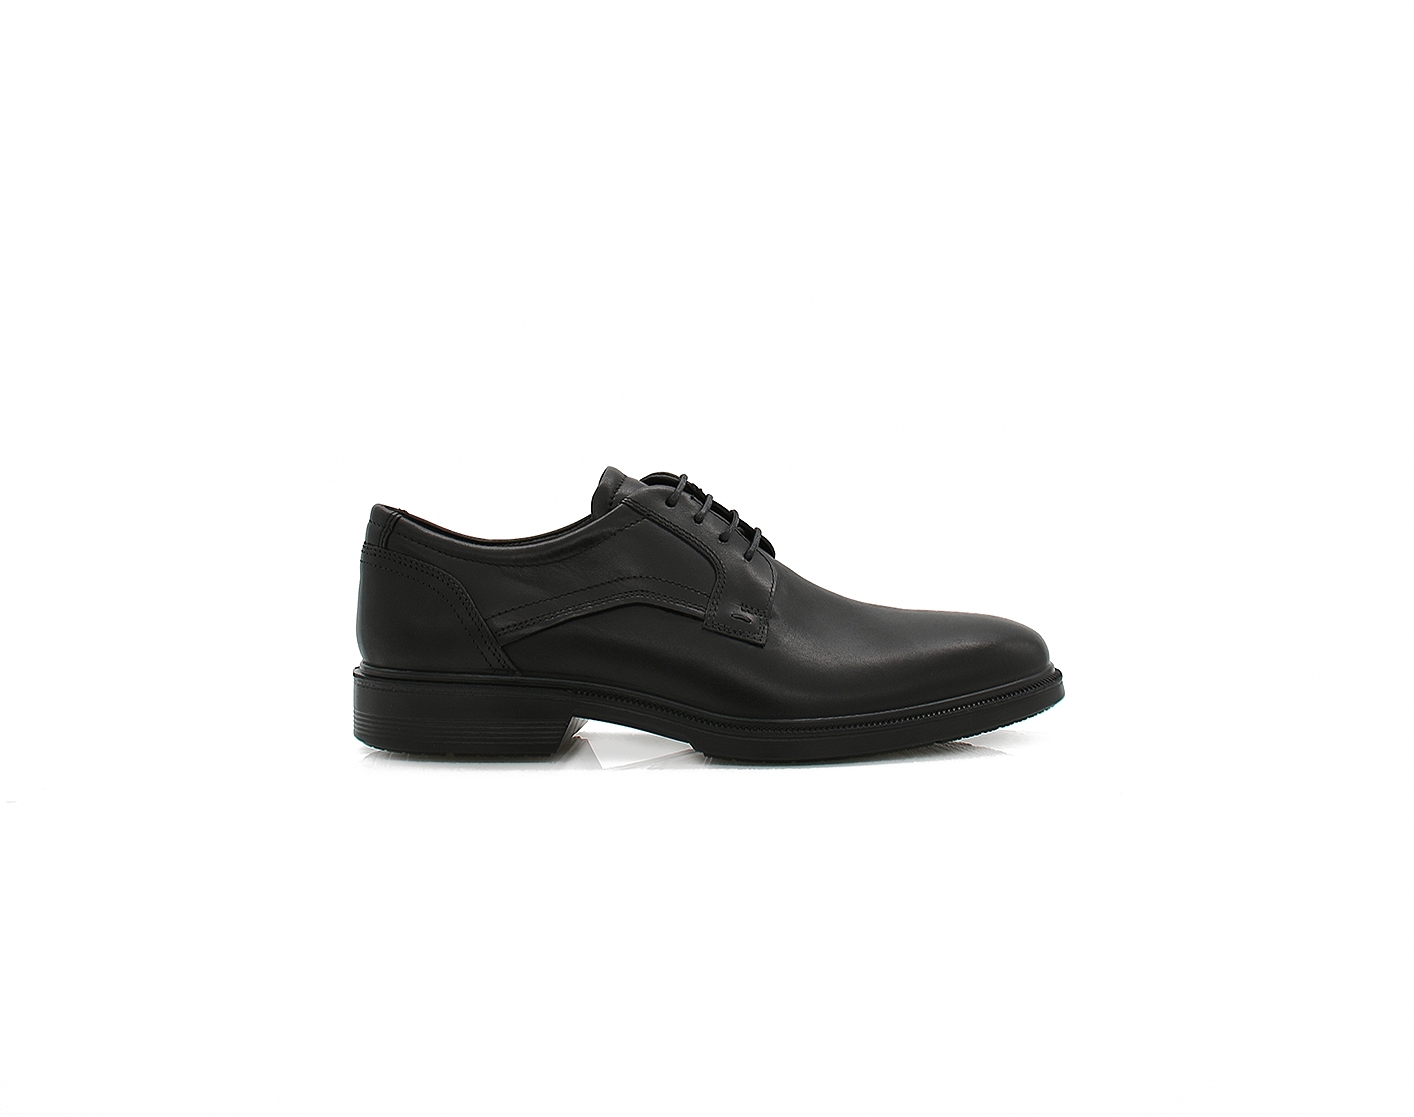 Mens Ecco Lisbon – Black Formal Shoes – Lace-Up – Strong Heel Support – Fits Narrow Foot – Fastening Opens Fully – Size 43 – Leather